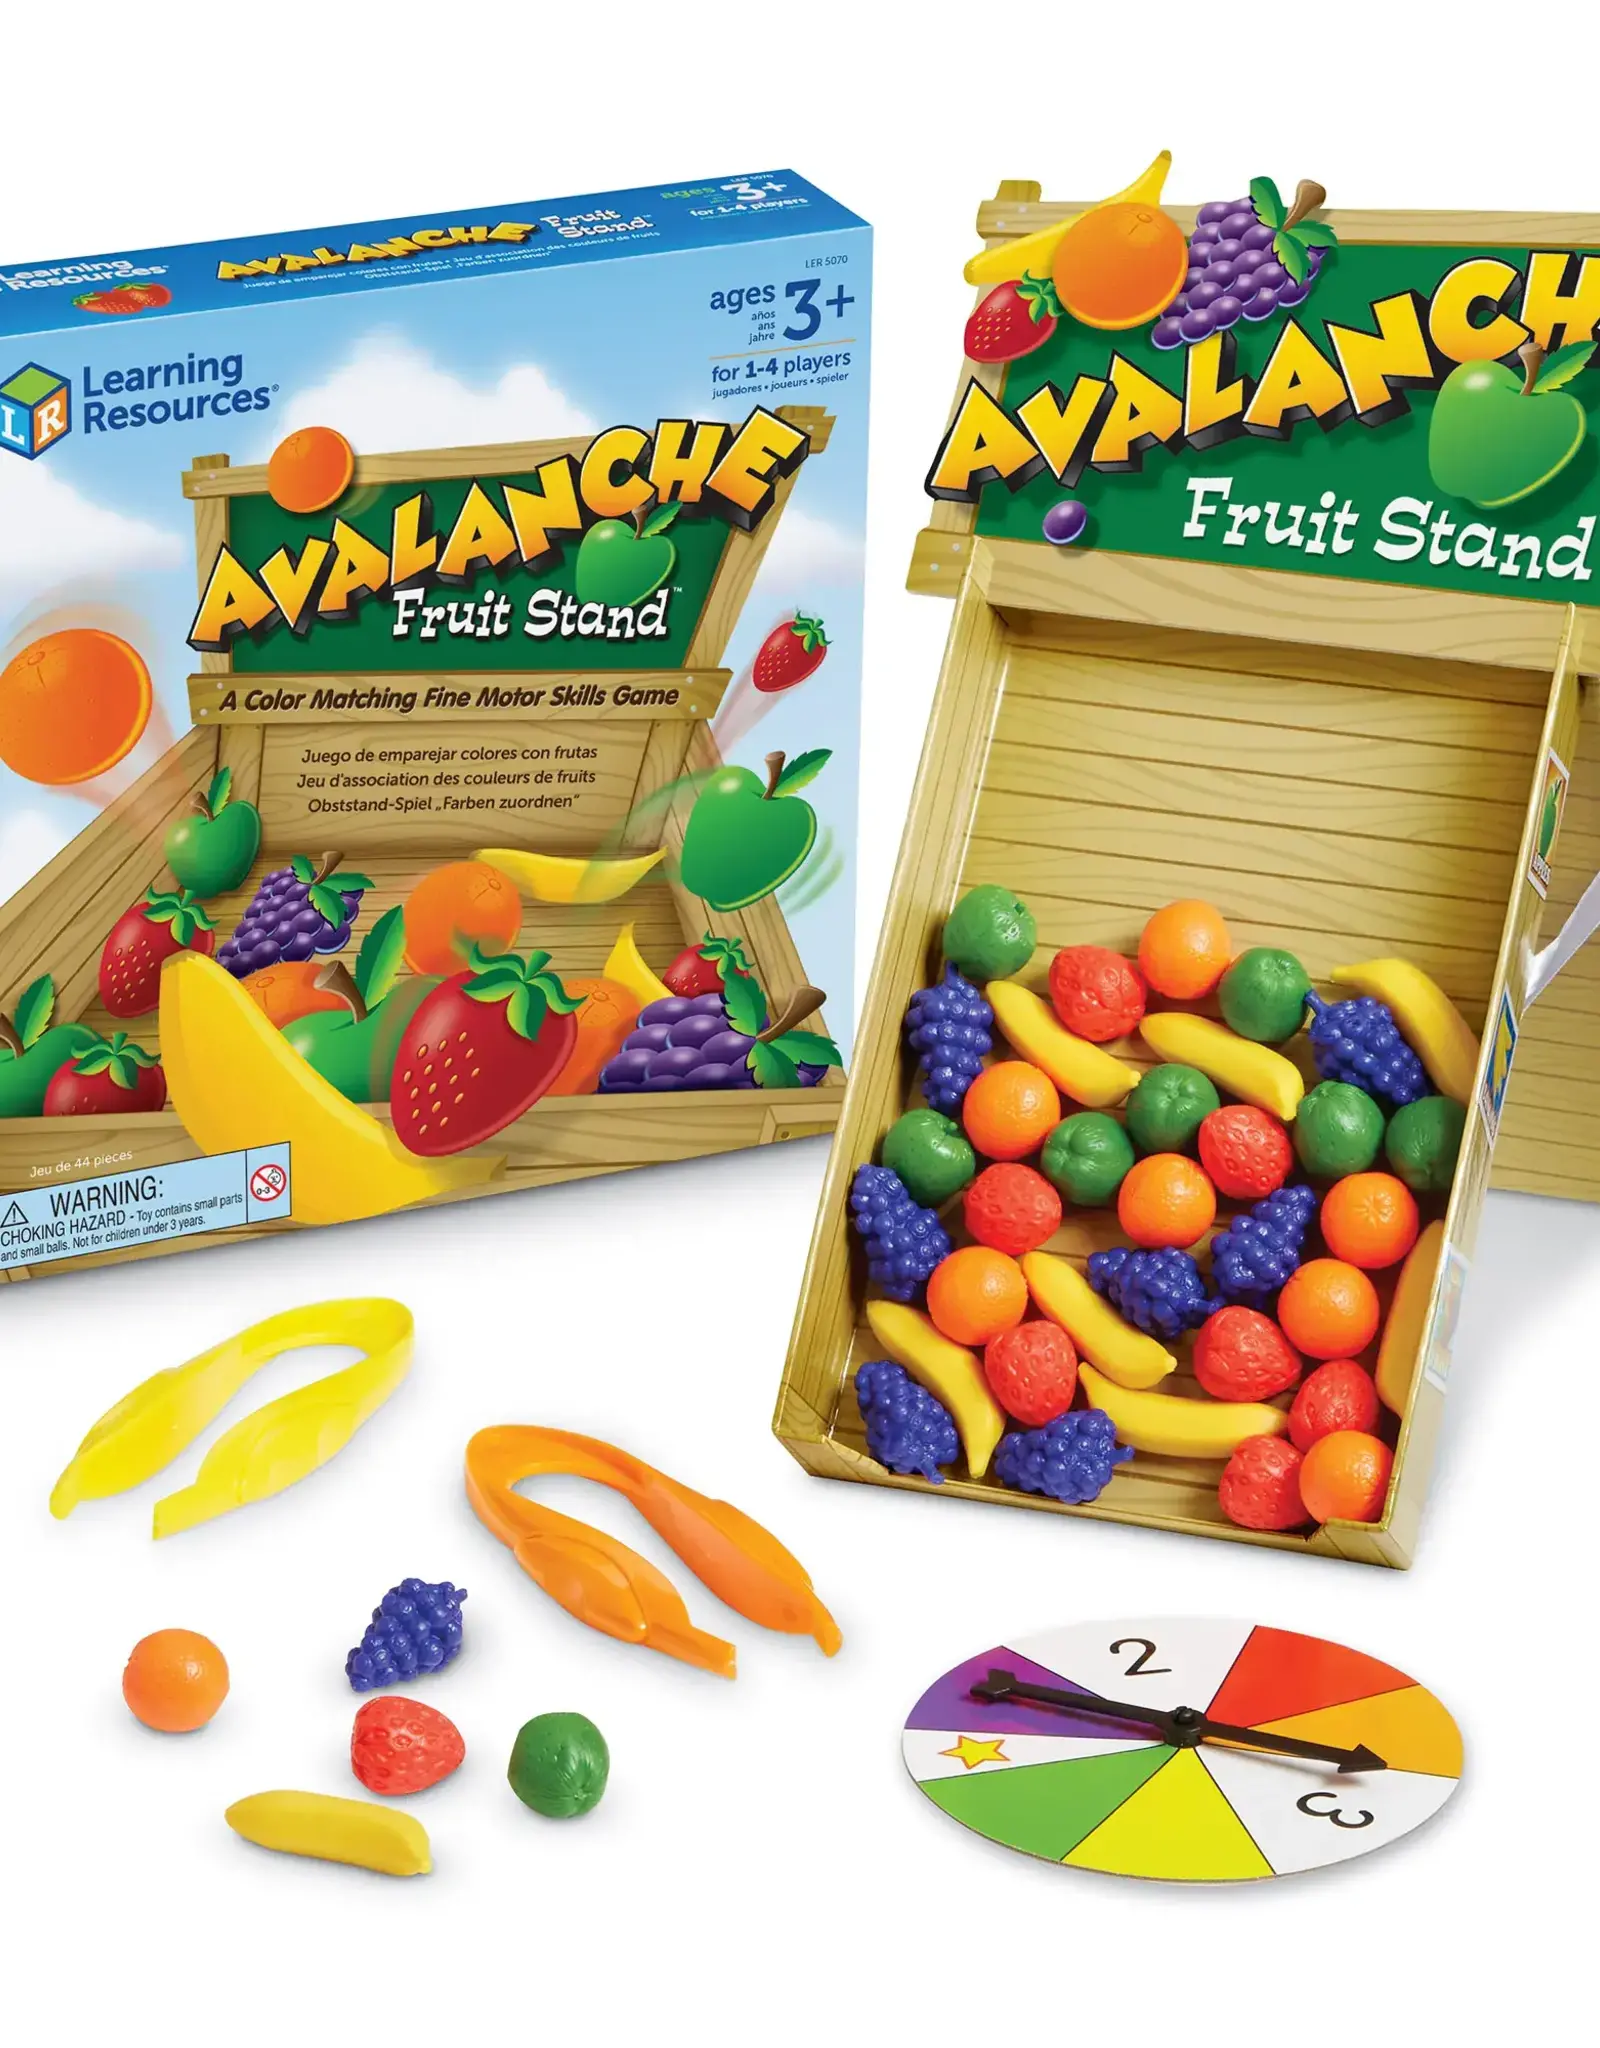 LEARNING RESOURCES Avalanche Fruit Stand